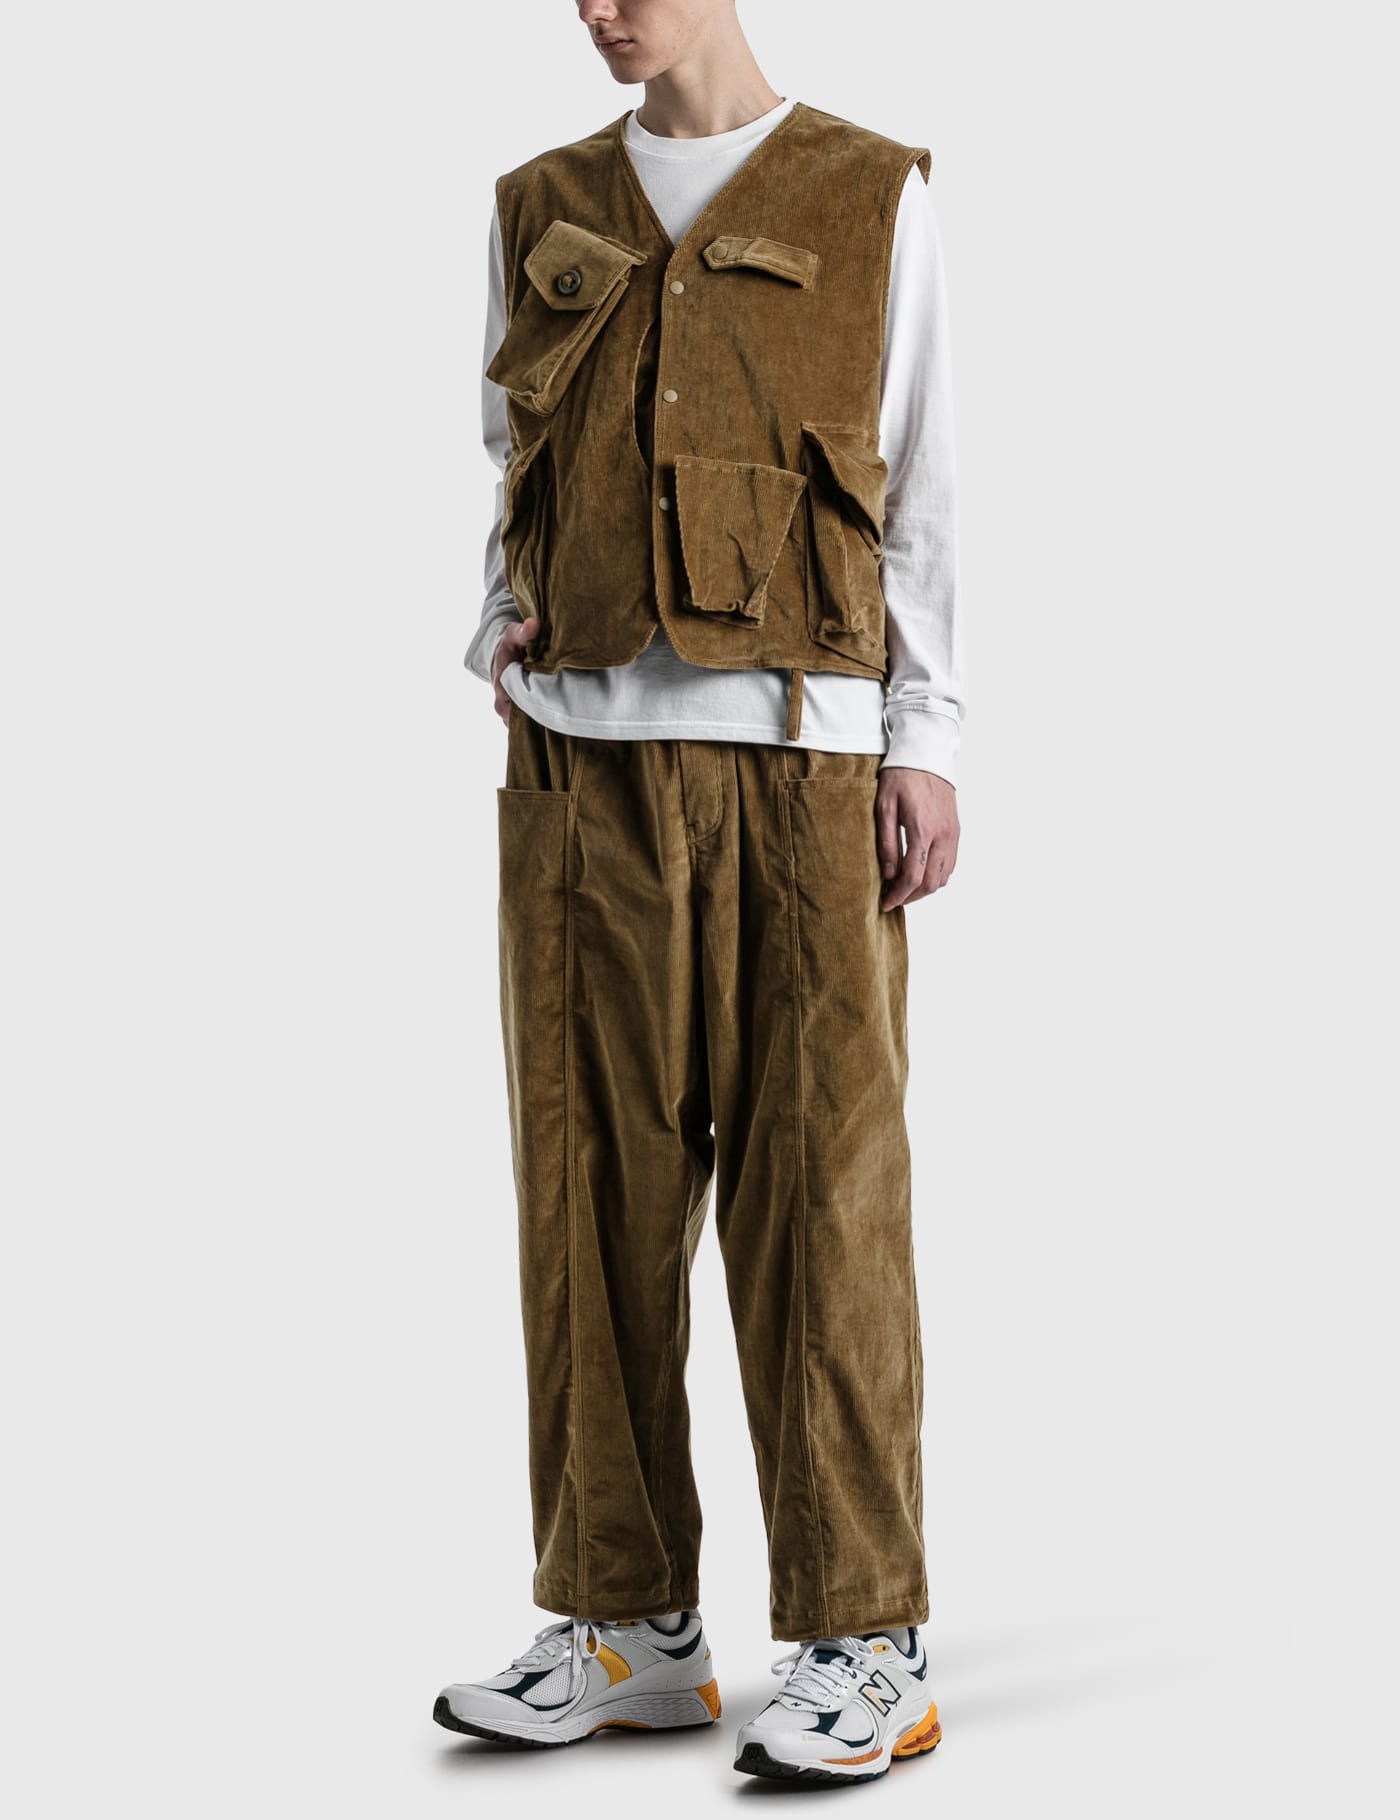 South2 West8 - Corduroy Tenkara Vest | HBX - Globally Curated 